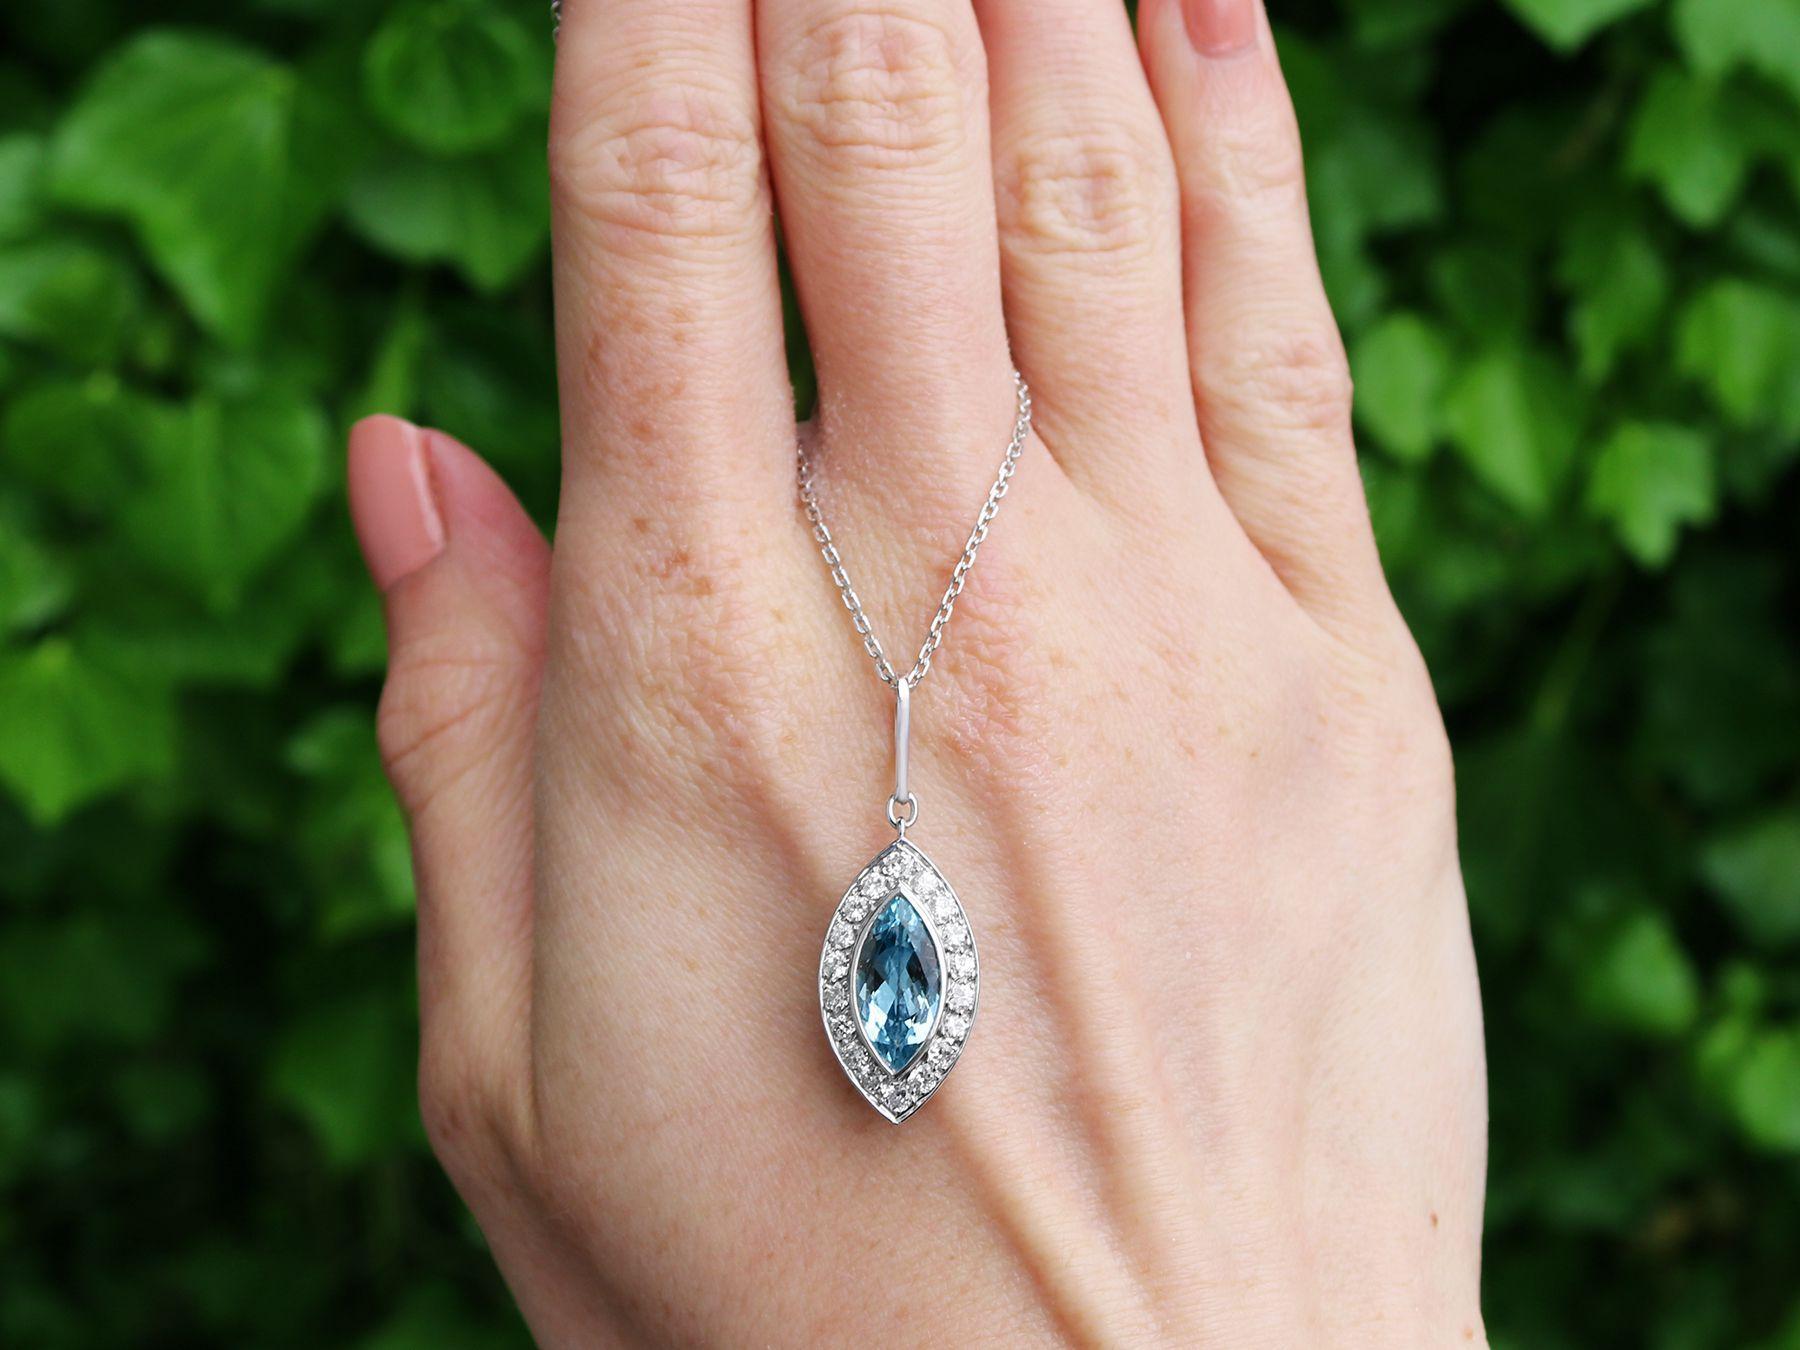 An fine and impressive antique 1.66 carat aquamarine and 0.81 carat diamond, platinum pendant; part of our diverse antique jewelry and estate jewelry collections.

This fine and impressive antique aquamarine pendant has been crafted in